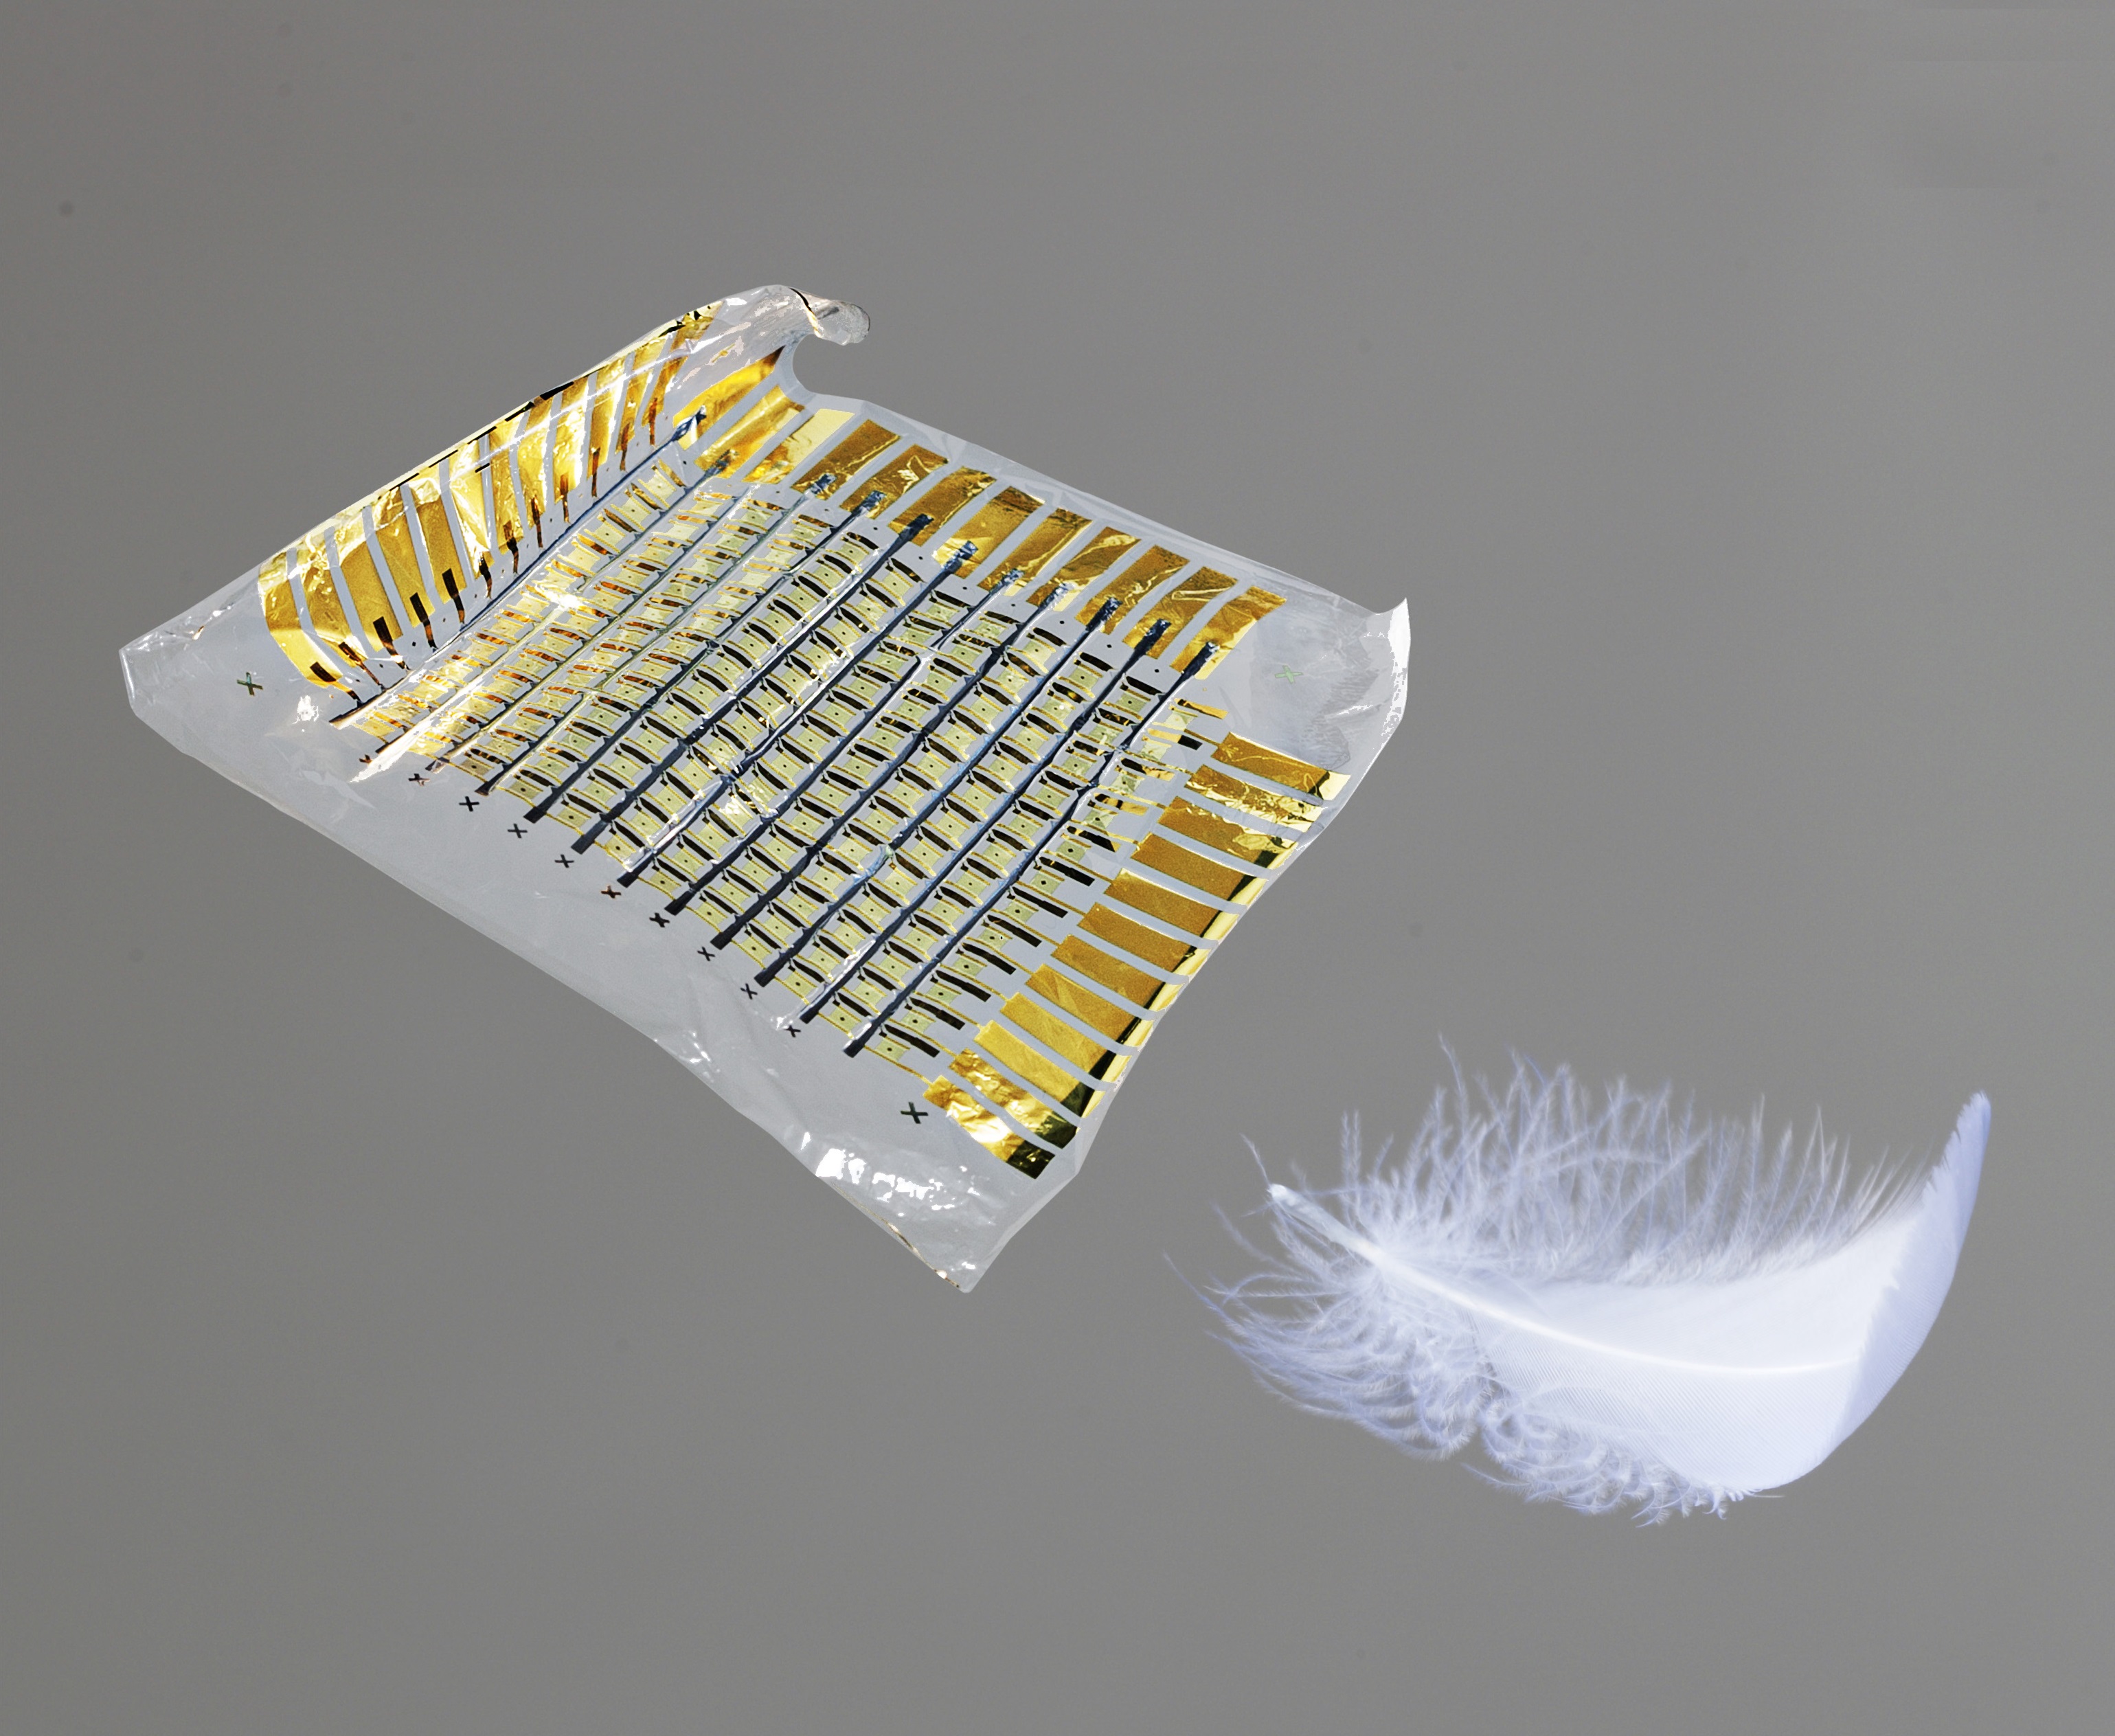 The world's lightest and thinnest flexible integrated circuits